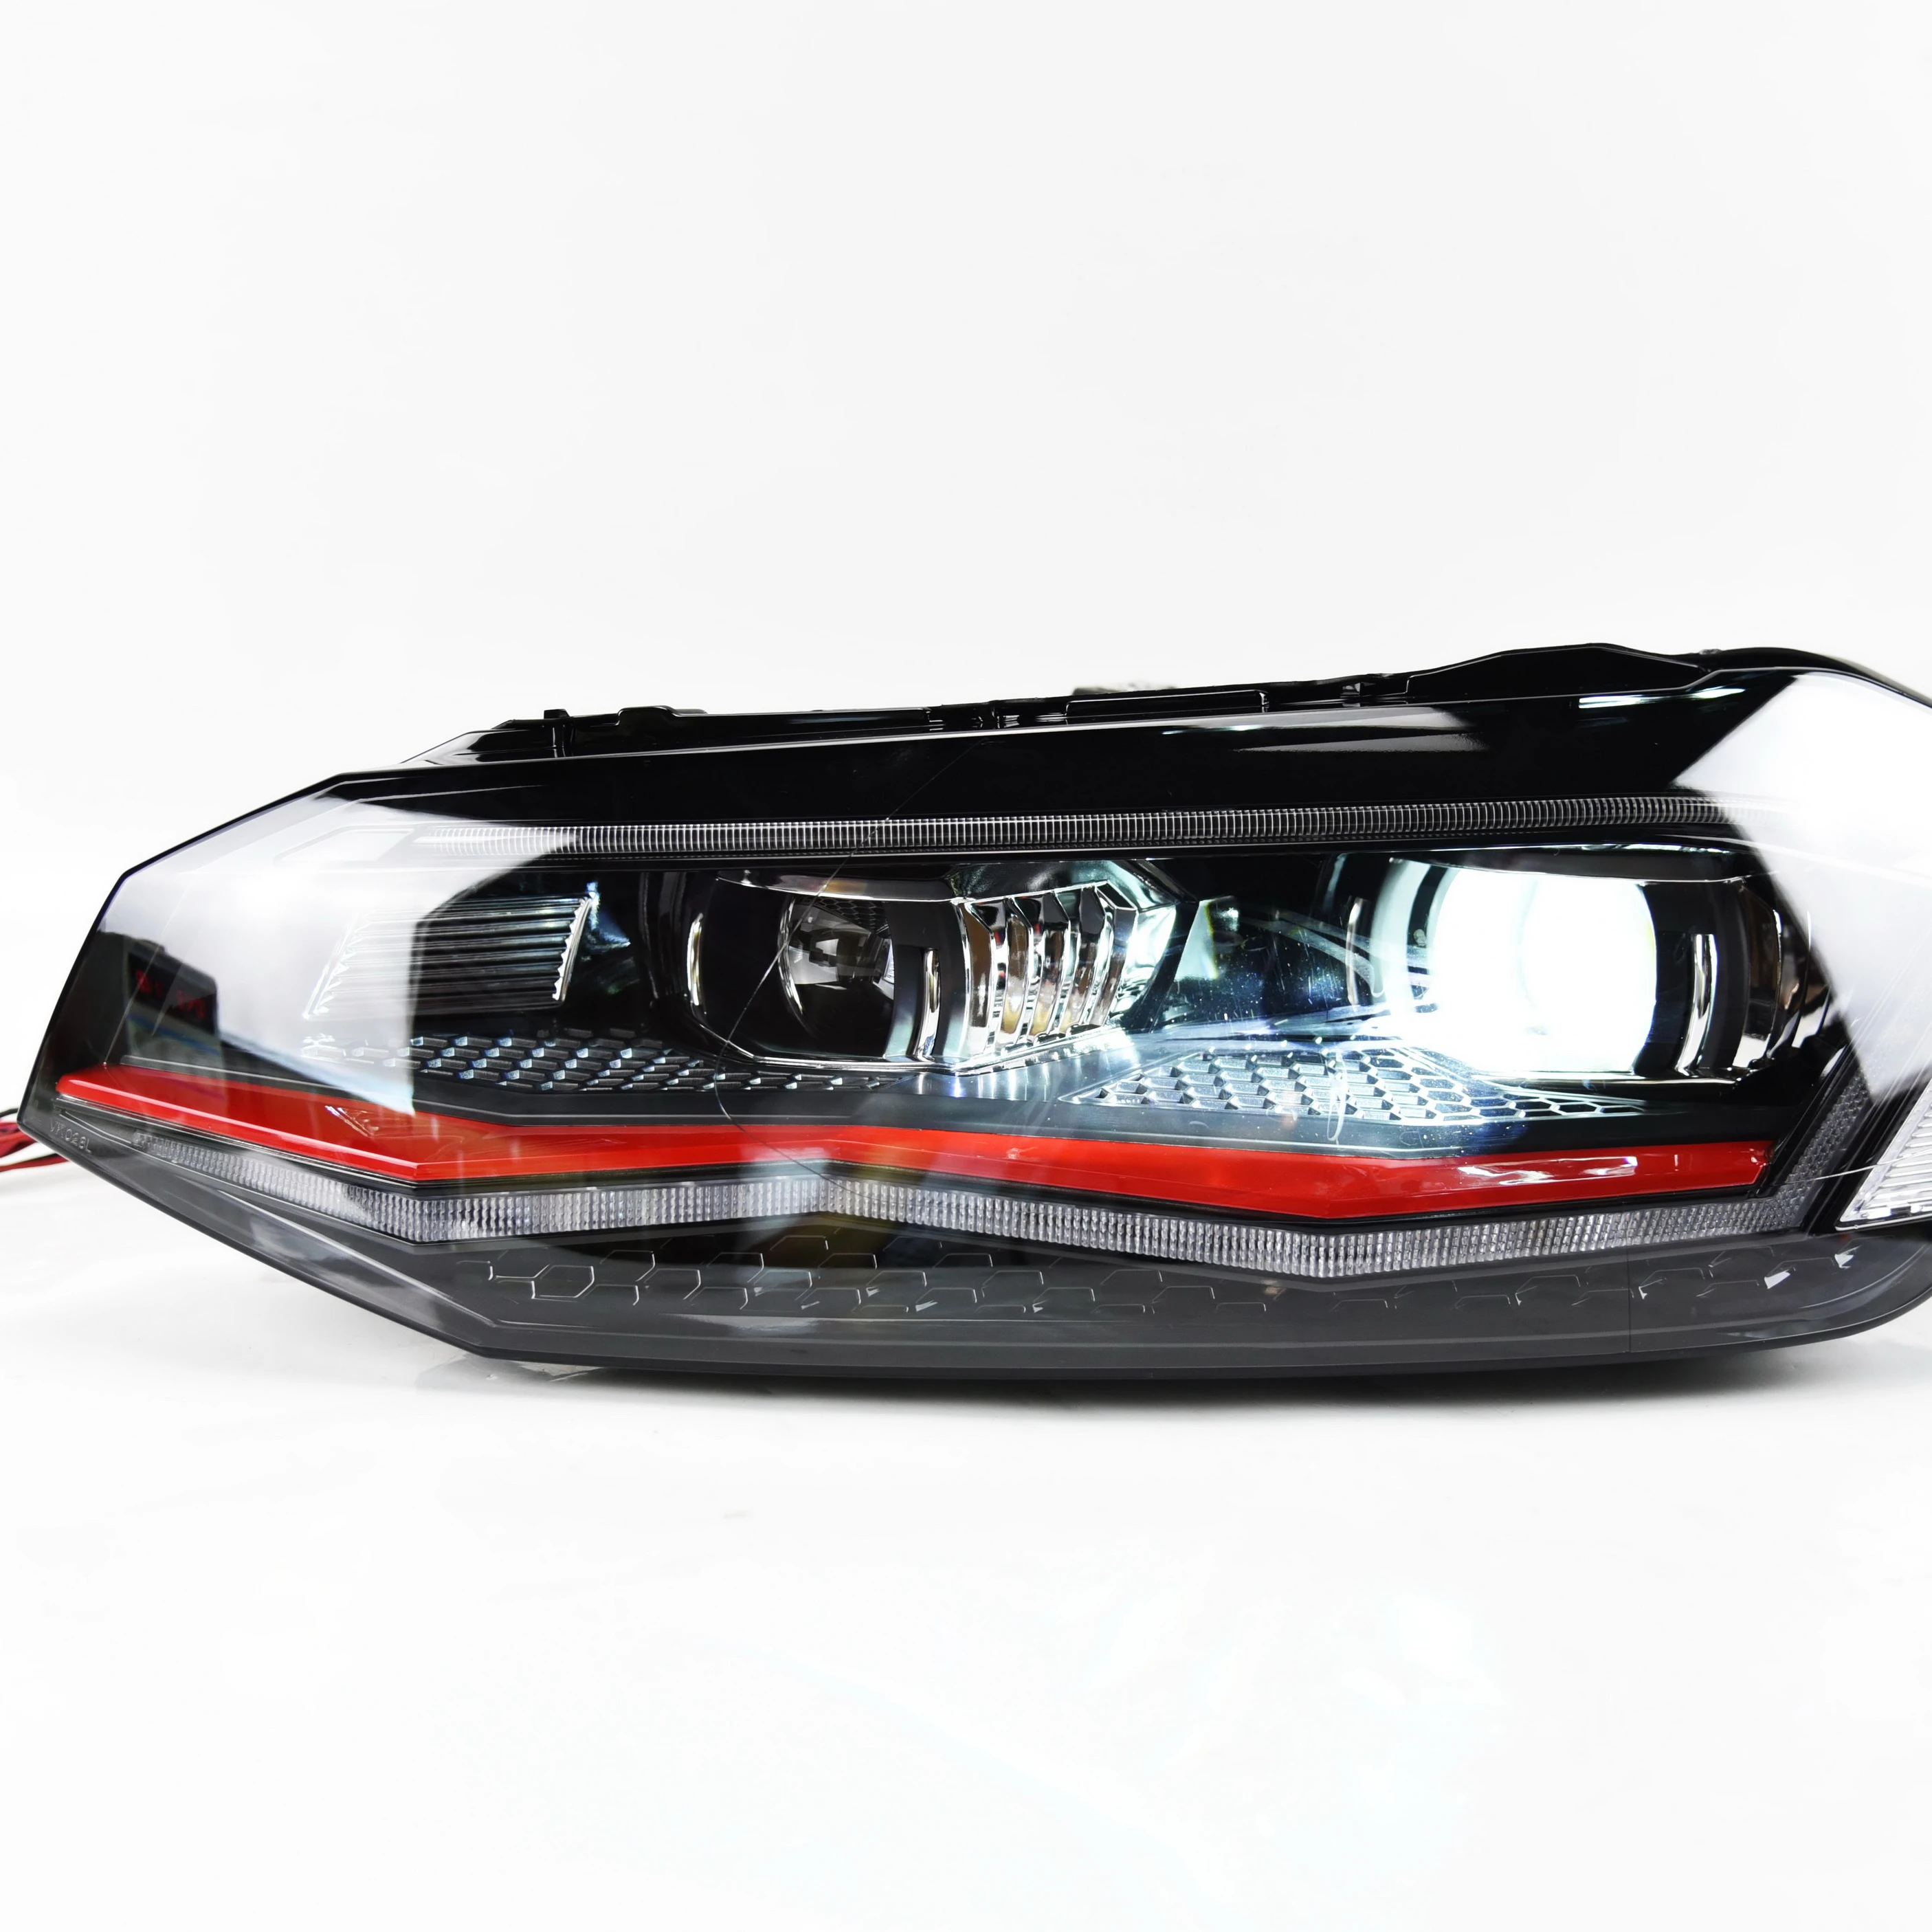 Wholesale Head Lamp Car for VW POLO 2019-2020 Headlights Lights Daytime Running Lights DRL H7 LED Bi Xenon Bulb Car Accessories From m.alibaba.com